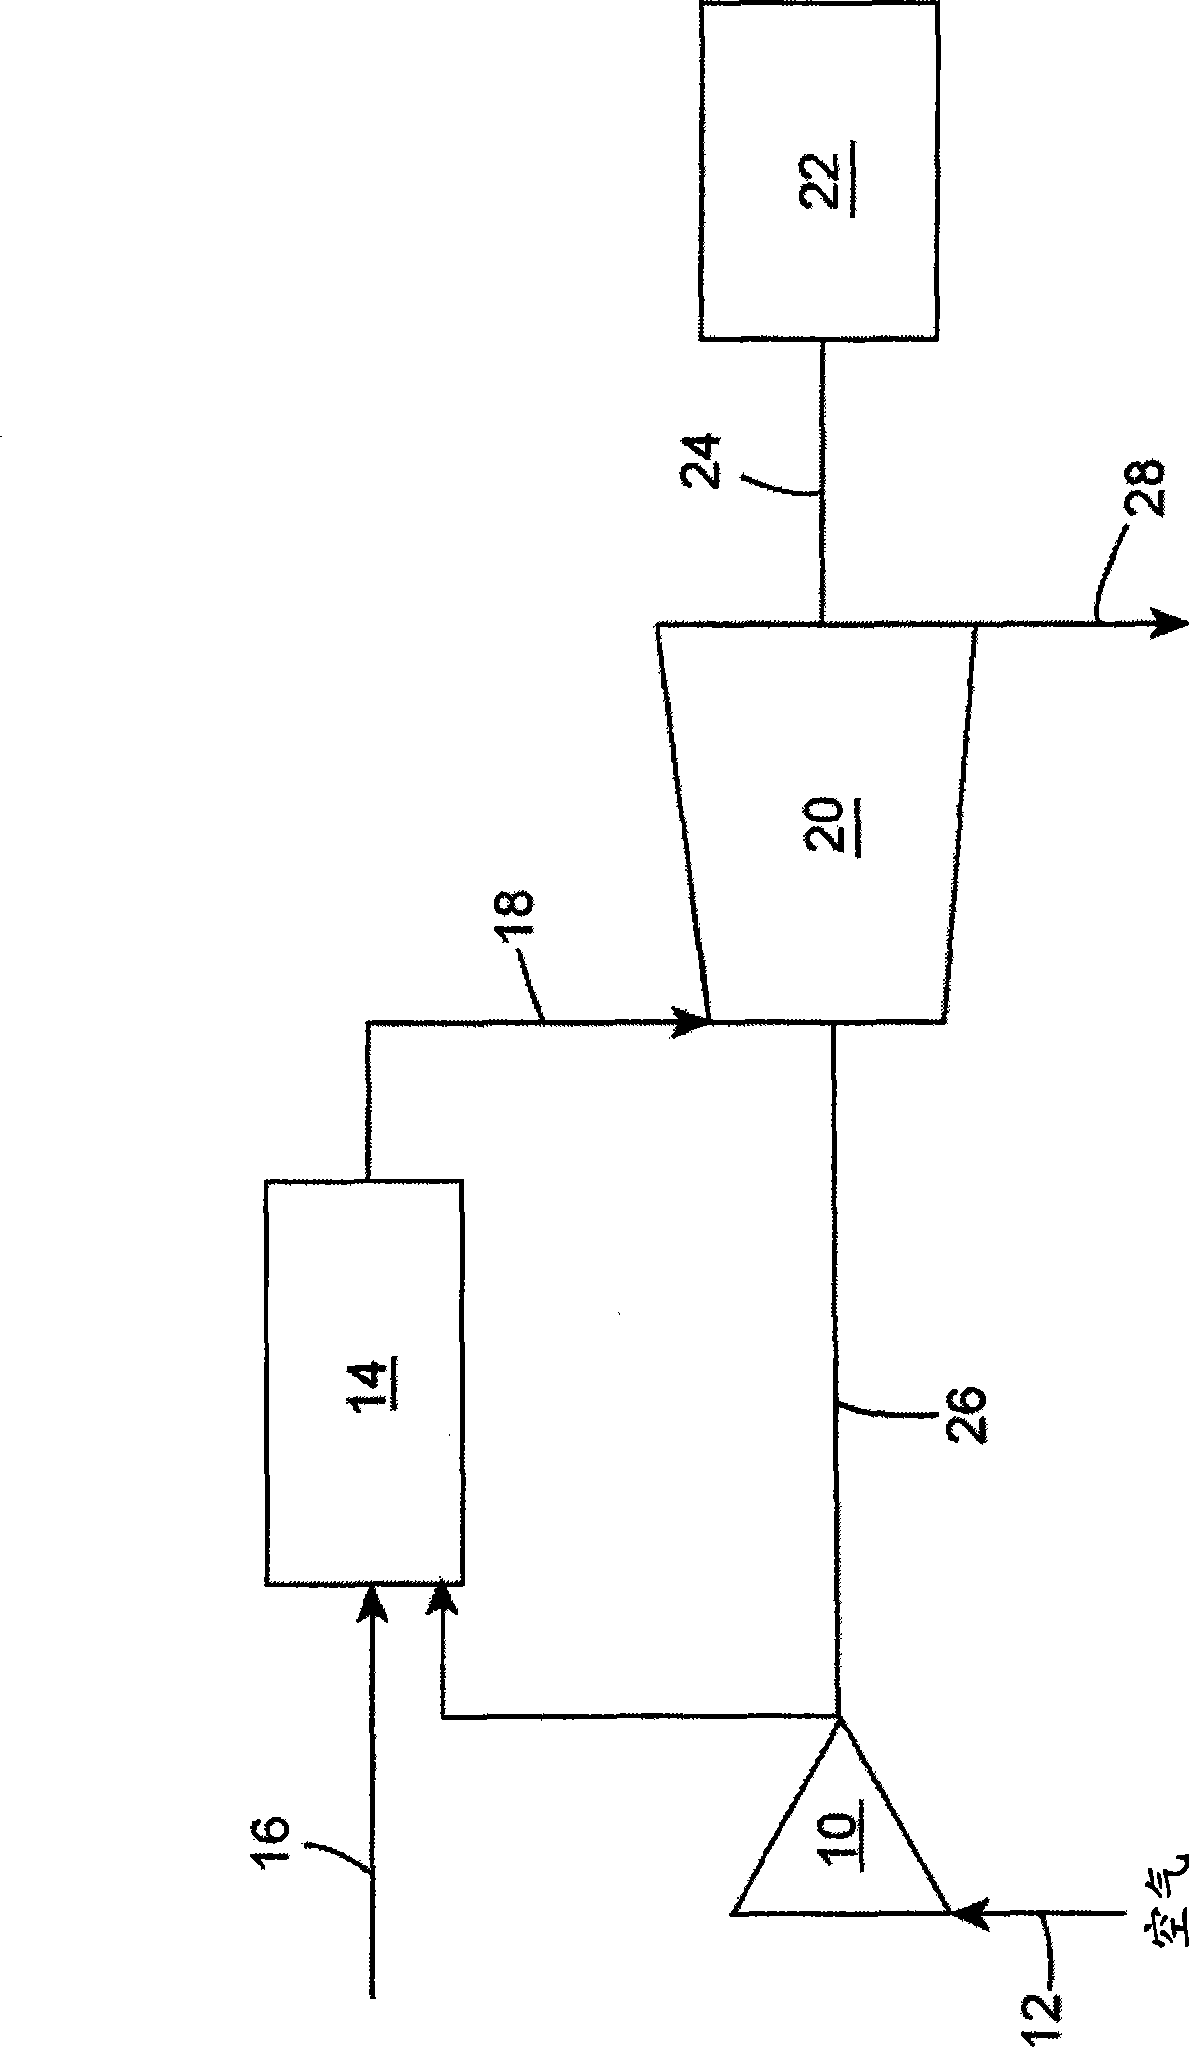 Method for the start-up of a gas turbine